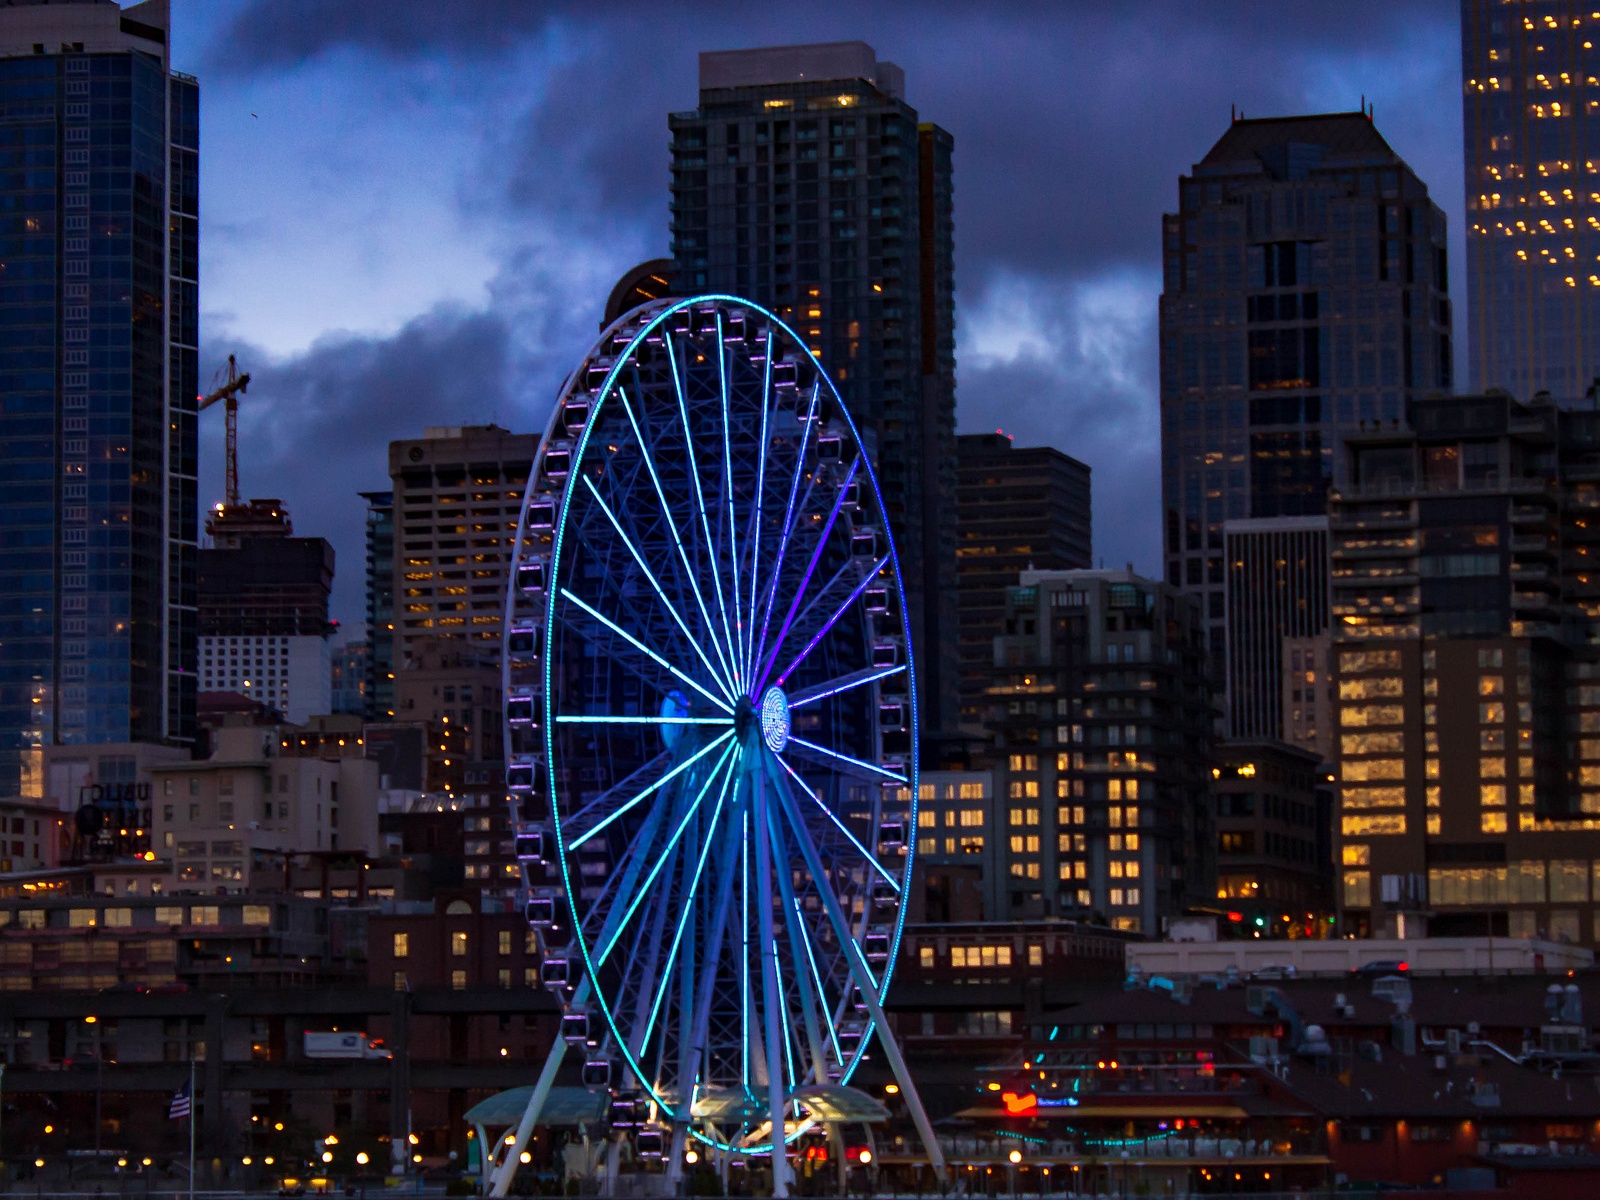 Seattle's Great Wheel and skyline at dusk.